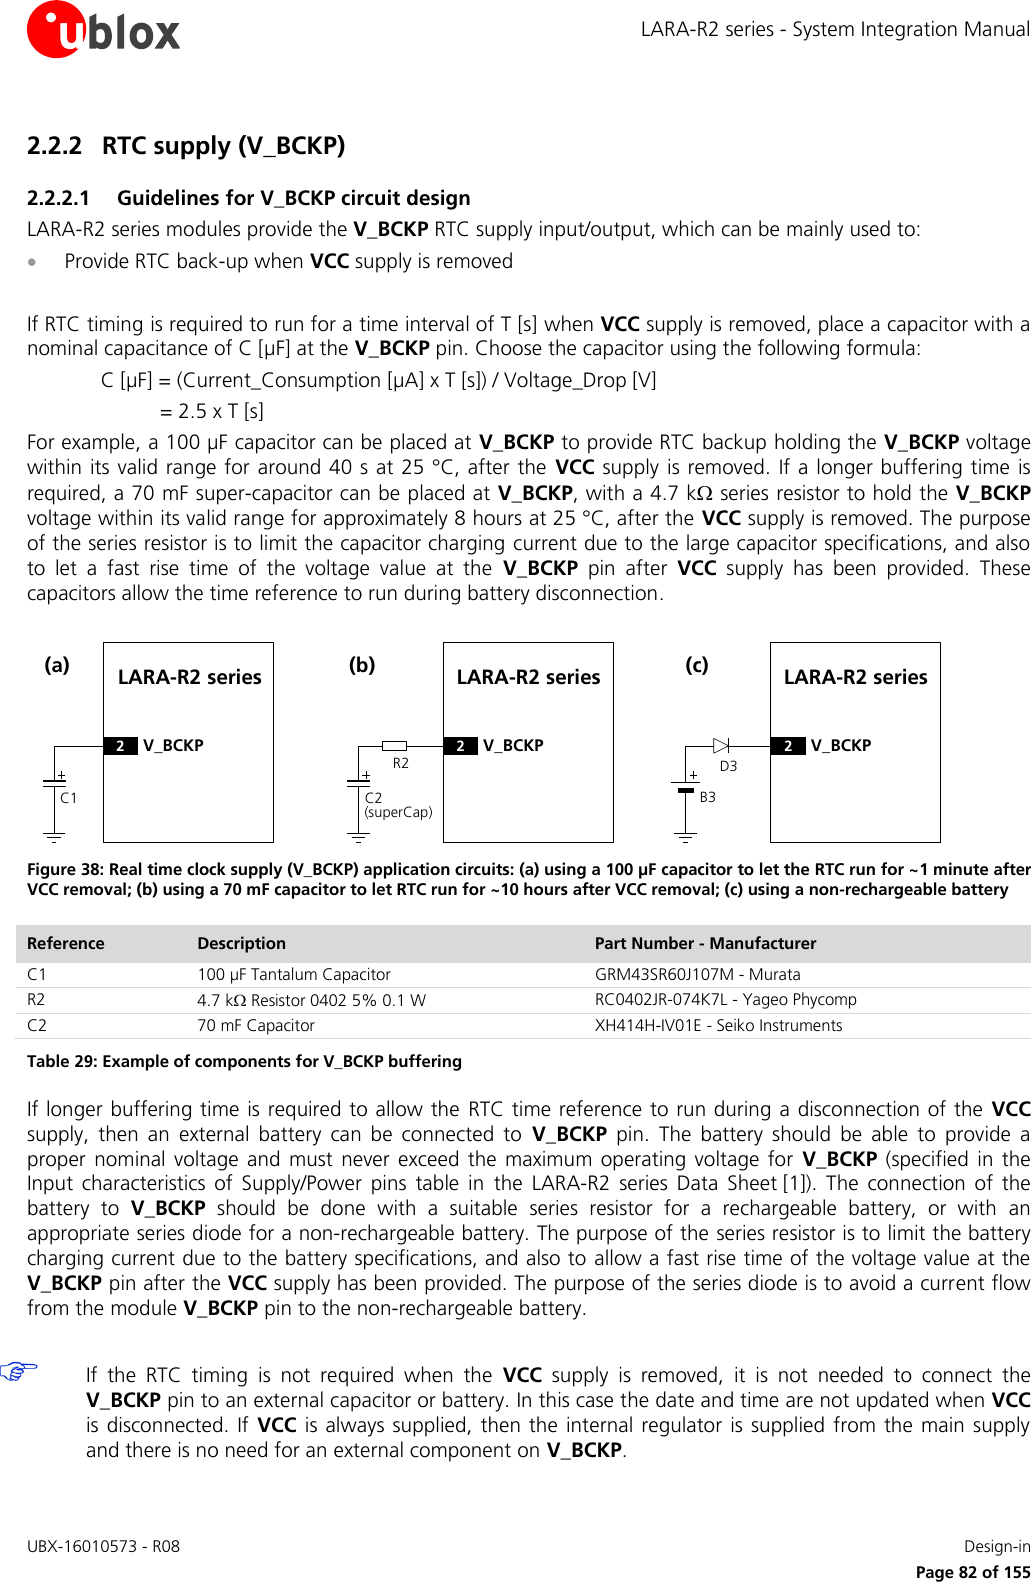 LARA-R2 series - System Integration Manual UBX-16010573 - R08    Design-in     Page 82 of 155 2.2.2 RTC supply (V_BCKP) 2.2.2.1 Guidelines for V_BCKP circuit design LARA-R2 series modules provide the V_BCKP RTC supply input/output, which can be mainly used to:   Provide RTC back-up when VCC supply is removed  If RTC timing is required to run for a time interval of T [s] when VCC supply is removed, place a capacitor with a nominal capacitance of C [µF] at the V_BCKP pin. Choose the capacitor using the following formula: C [µF] = (Current_Consumption [µA] x T [s]) / Voltage_Drop [V] = 2.5 x T [s]  For example, a 100 µF capacitor can be placed at V_BCKP to provide RTC backup holding the V_BCKP voltage within its valid range for around 40 s at 25 °C, after the  VCC supply is removed. If a longer buffering time  is required, a 70 mF super-capacitor can be placed at V_BCKP, with a 4.7 k series resistor to hold the V_BCKP voltage within its valid range for approximately 8 hours at 25 °C, after the VCC supply is removed. The purpose of the series resistor is to limit the capacitor charging current due to the large capacitor specifications, and also to  let  a  fast  rise  time  of  the  voltage  value  at  the  V_BCKP  pin  after  VCC  supply  has  been  provided.  These capacitors allow the time reference to run during battery disconnection. LARA-R2 seriesC1(a)2V_BCKPR2LARA-R2 seriesC2(superCap)(b)2V_BCKPD3LARA-R2 seriesB3(c)2V_BCKP Figure 38: Real time clock supply (V_BCKP) application circuits: (a) using a 100 µF capacitor to let the RTC run for ~1 minute after VCC removal; (b) using a 70 mF capacitor to let RTC run for ~10 hours after VCC removal; (c) using a non-rechargeable battery Reference Description Part Number - Manufacturer C1 100 µF Tantalum Capacitor GRM43SR60J107M - Murata R2 4.7 k Resistor 0402 5% 0.1 W  RC0402JR-074K7L - Yageo Phycomp C2 70 mF Capacitor  XH414H-IV01E - Seiko Instruments Table 29: Example of components for V_BCKP buffering If longer buffering time is required to allow the  RTC time reference to run during a disconnection of the  VCC supply,  then  an  external  battery  can  be  connected  to  V_BCKP  pin.  The  battery  should  be  able  to  provide  a proper  nominal  voltage  and  must  never  exceed  the  maximum  operating voltage  for  V_BCKP  (specified  in  the Input  characteristics  of  Supply/Power  pins  table  in  the  LARA-R2  series Data  Sheet [1]).  The  connection  of  the battery  to  V_BCKP  should  be  done  with  a  suitable  series  resistor  for  a  rechargeable  battery,  or  with  an appropriate series diode for a non-rechargeable battery. The purpose of the series resistor is to limit the battery charging current due to the battery specifications, and also to  allow a fast rise time of the voltage value at the V_BCKP pin after the VCC supply has been provided. The purpose of the series diode is to avoid a current flow from the module V_BCKP pin to the non-rechargeable battery.   If  the  RTC  timing  is  not  required  when  the  VCC  supply  is  removed,  it  is  not  needed  to  connect  the V_BCKP pin to an external capacitor or battery. In this case the date and time are not updated when VCC is disconnected. If  VCC  is  always supplied, then  the internal regulator is supplied from the  main supply and there is no need for an external component on V_BCKP. 